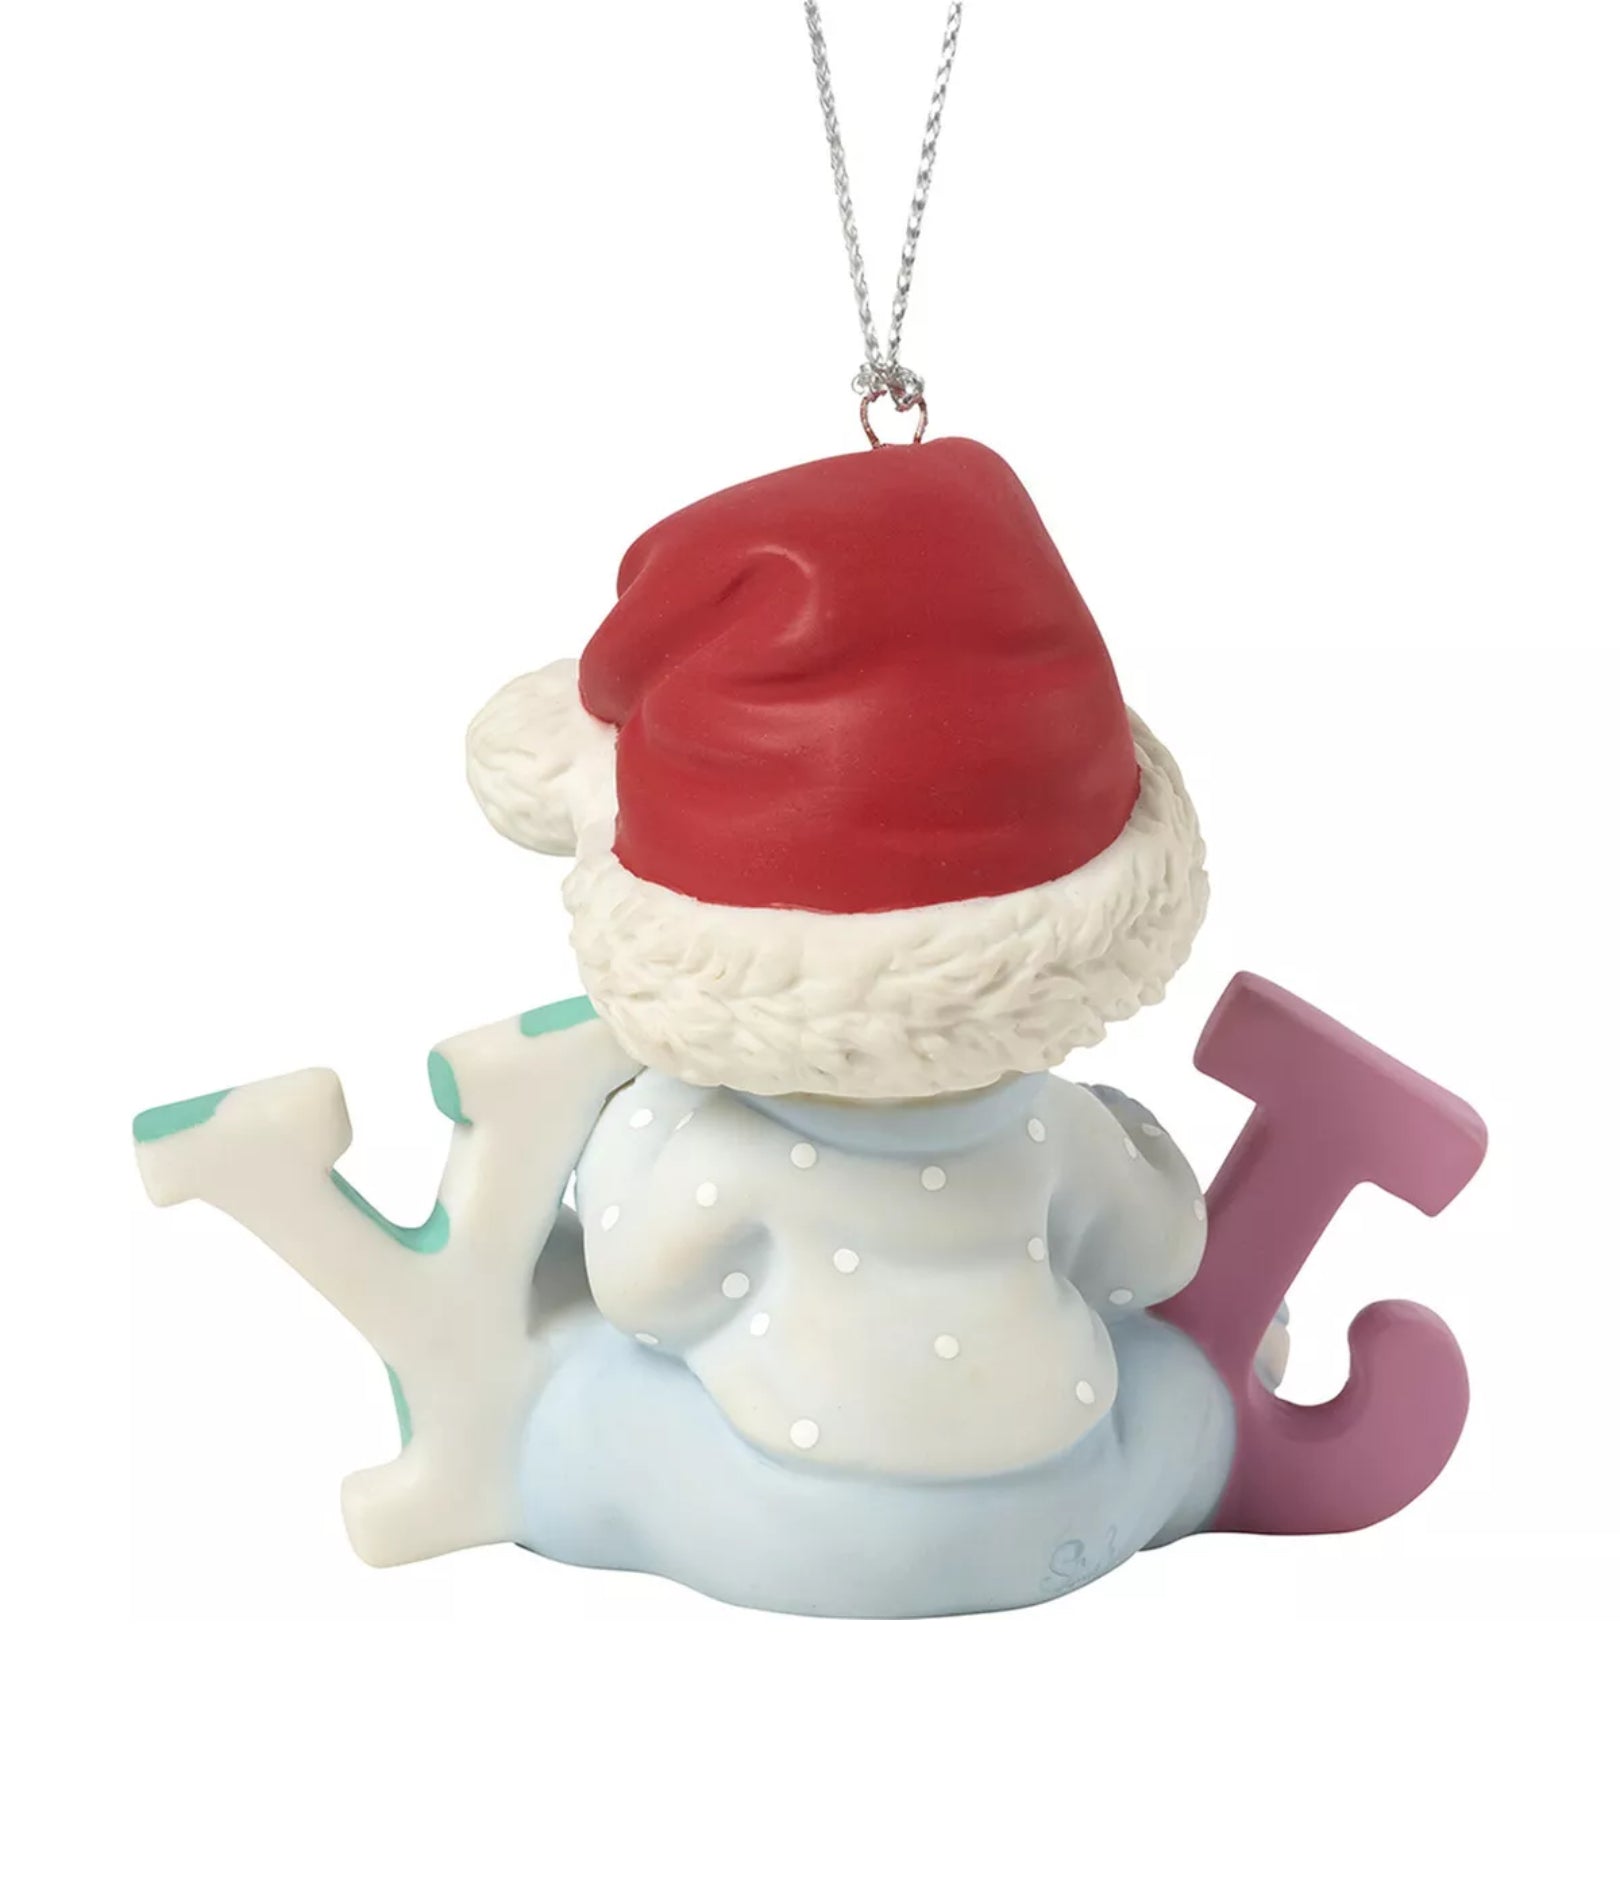 Baby's First Christmas 2019 (Boy) -  Precious Moment Ornament